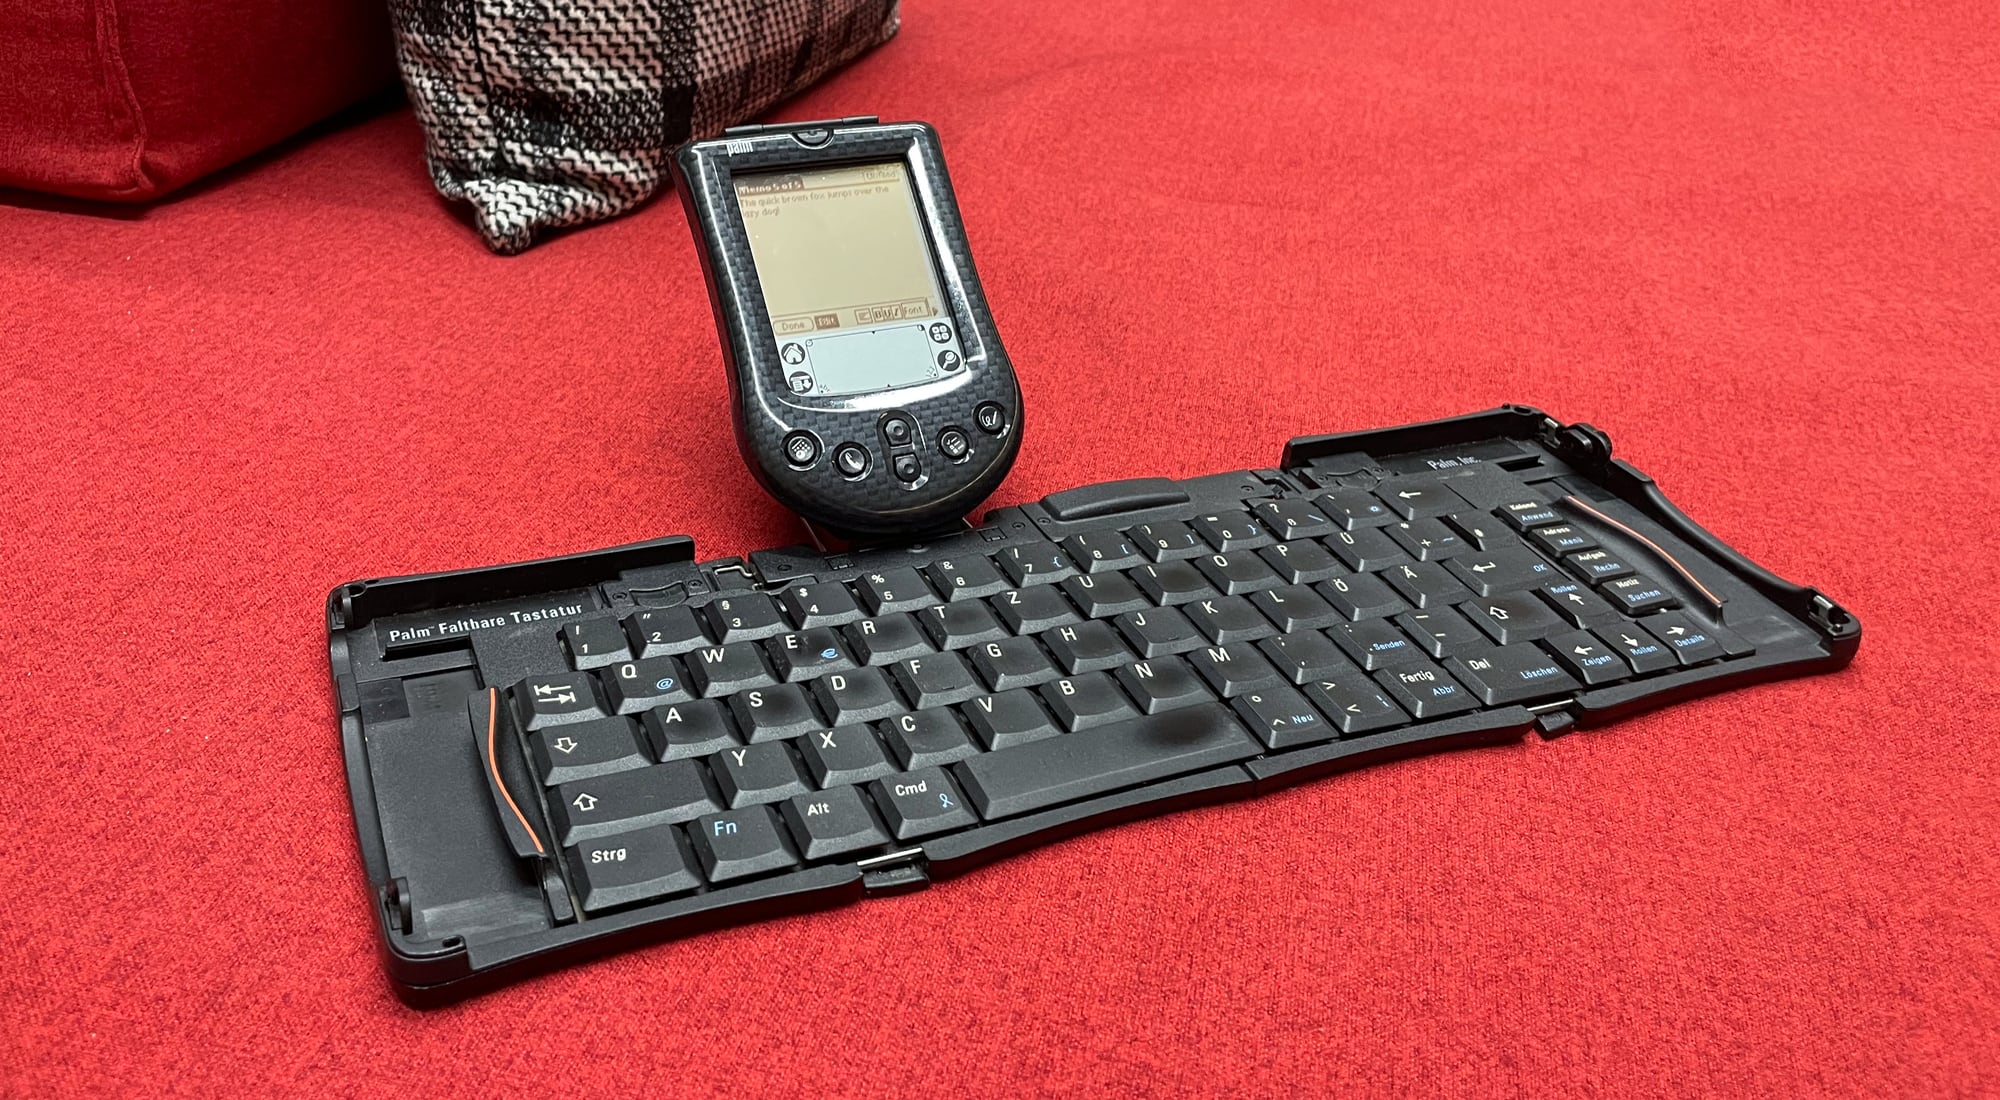 The Palm m125 and the Stowaway keyboard - ready to type